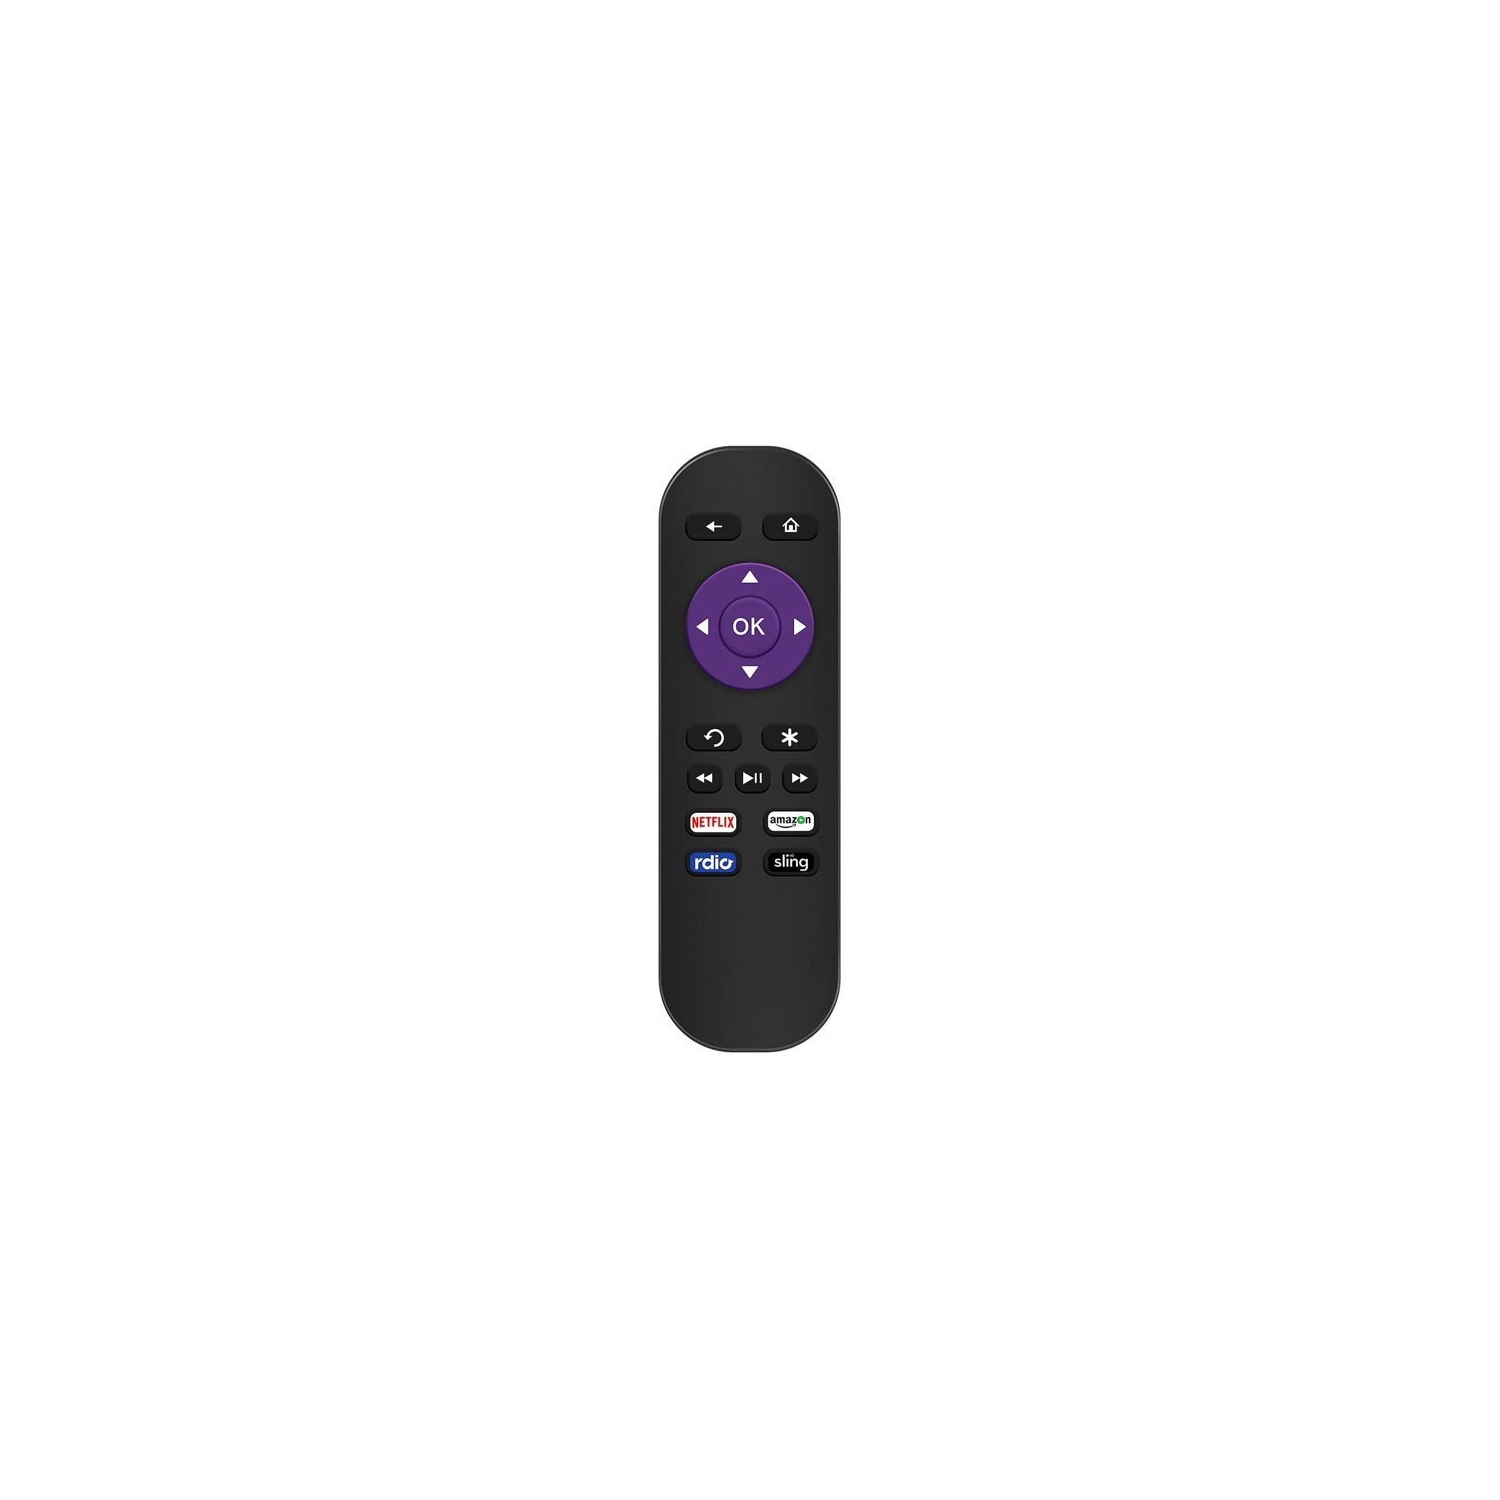 Universal Roku Remote Control Replacement for RCA Roku Smart TV Remote and Roku RCA Smart TV 32 40 43 49 50 55 60 65 70 inch, 4K LED LCD HDR UHD Smart TV